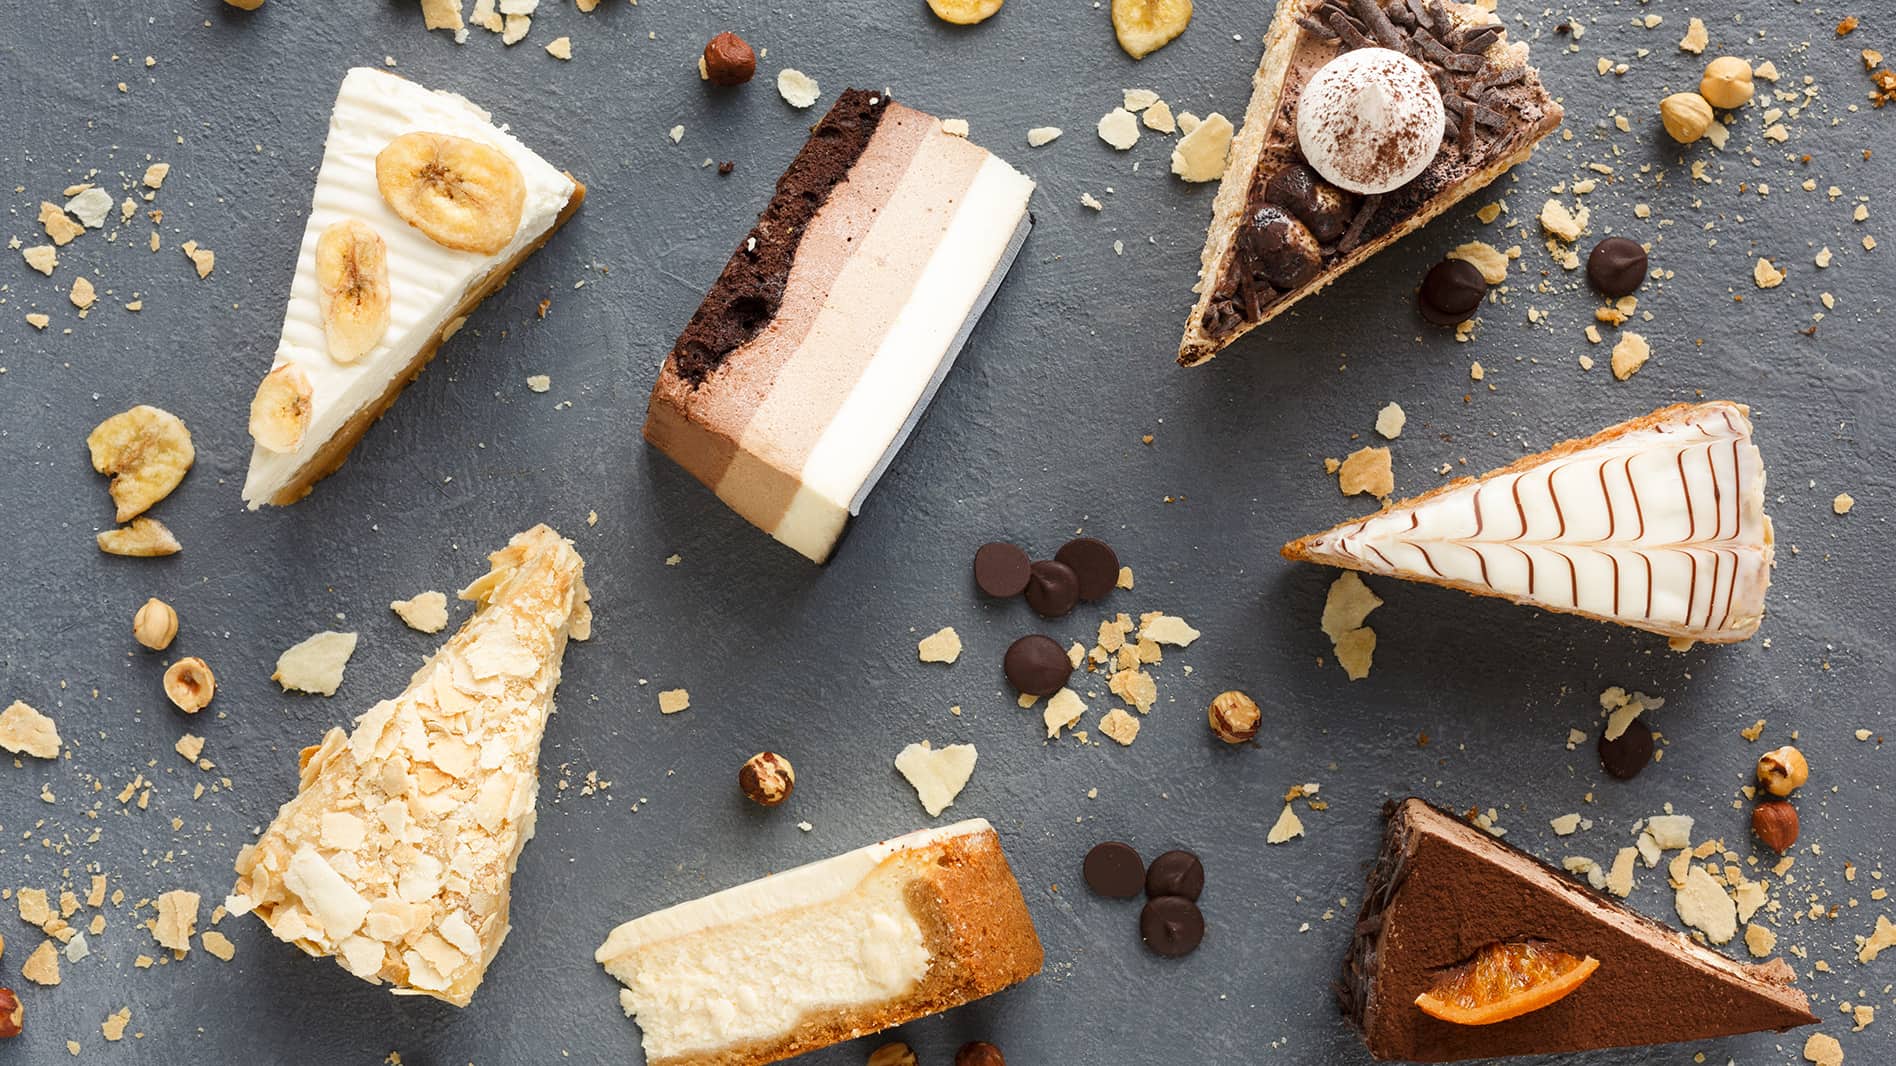 The Top 5 Desserts Your Customers Are Craving